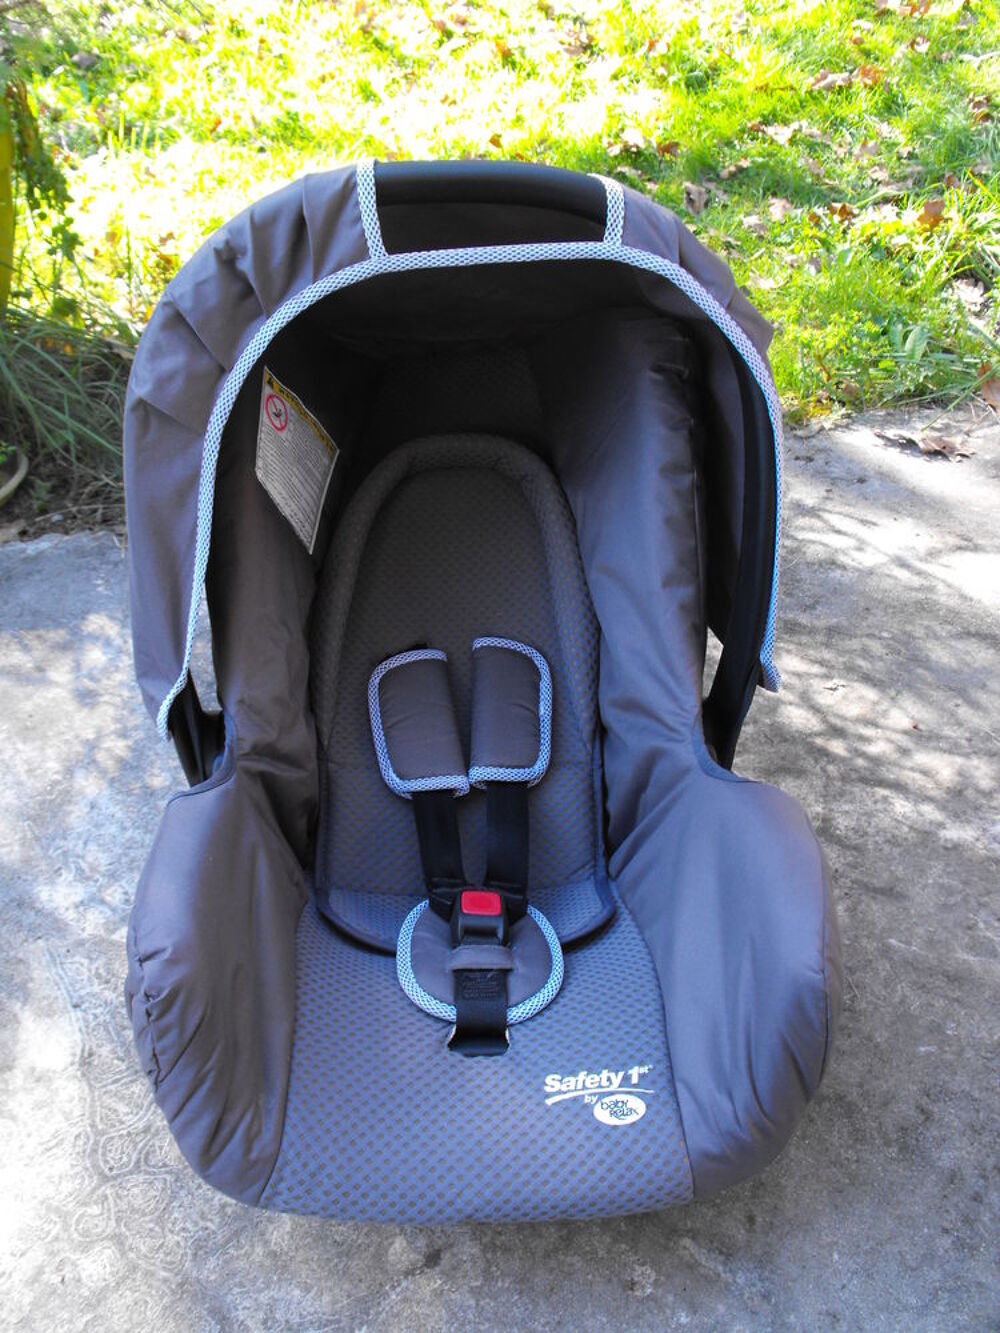 Cosi Safety 1st Baby relax Puriculture